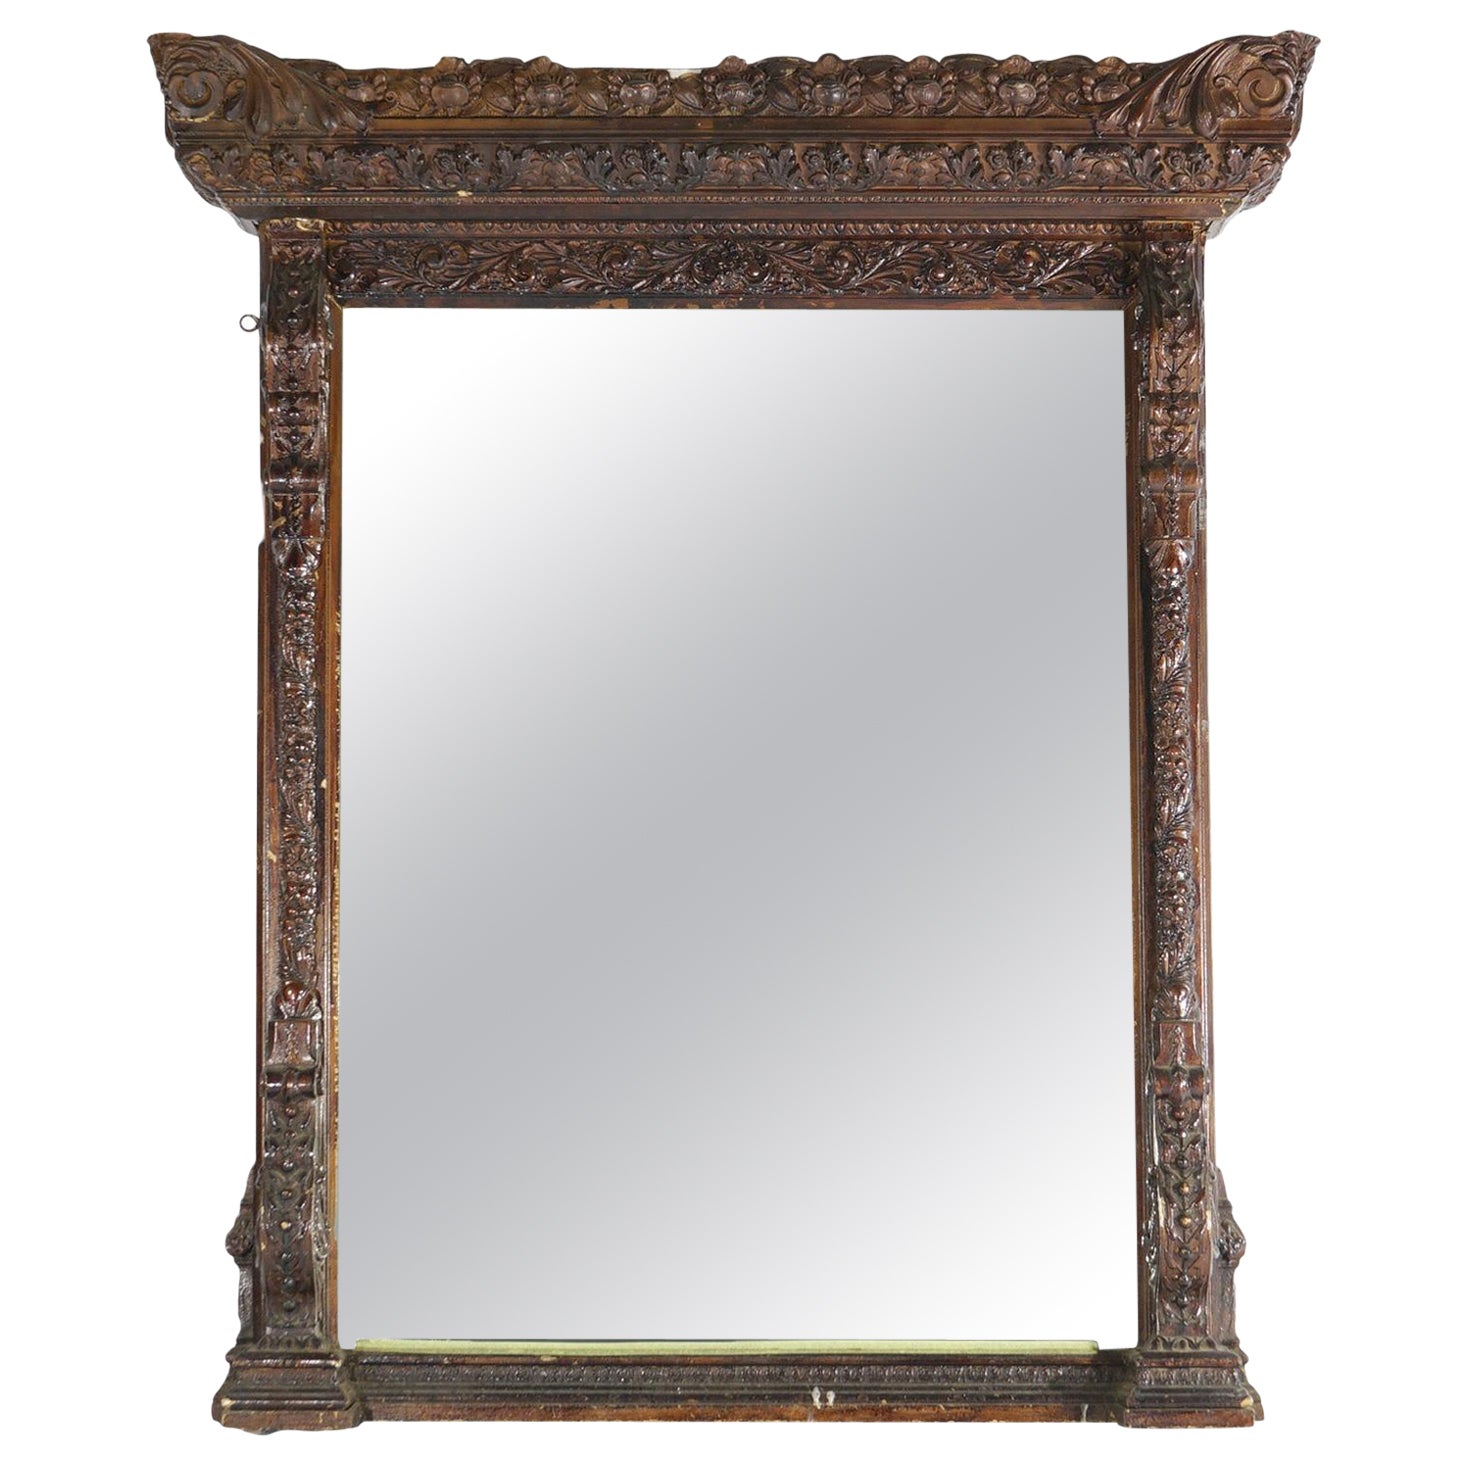 Antique Renaissance Revival Heavily Carved Wood & Gesso Over Mantle Mirror 19thC For Sale